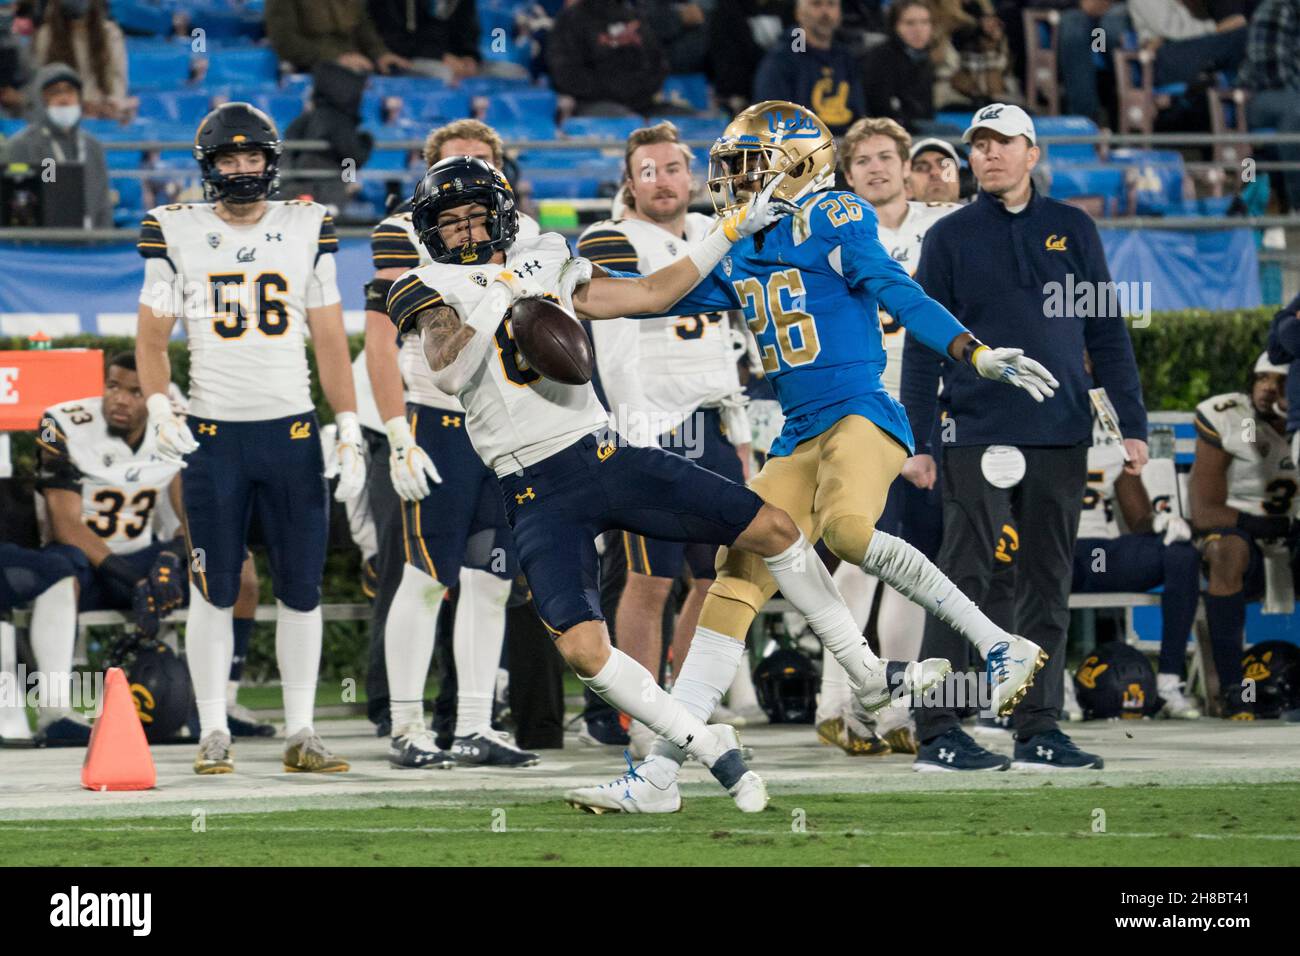 UCLA Bruins defensive back Devin Kirkwood (26) i so-called for pass interference against California Golden Bears wide receiver Trevon Clark (80) durin Stock Photo